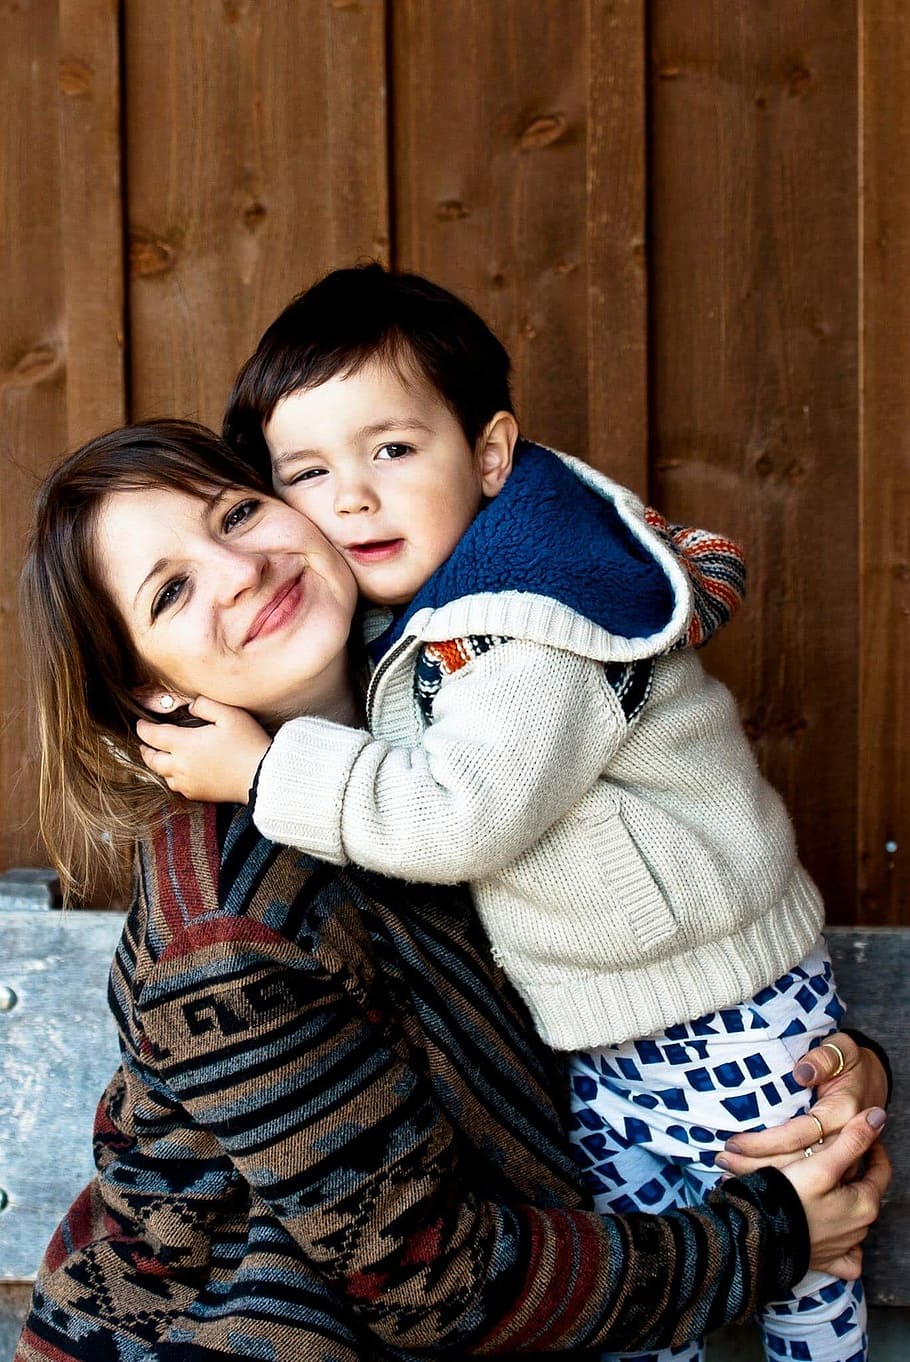 love, mother, son, child, portrait, togetherness, women, smiling, females, family